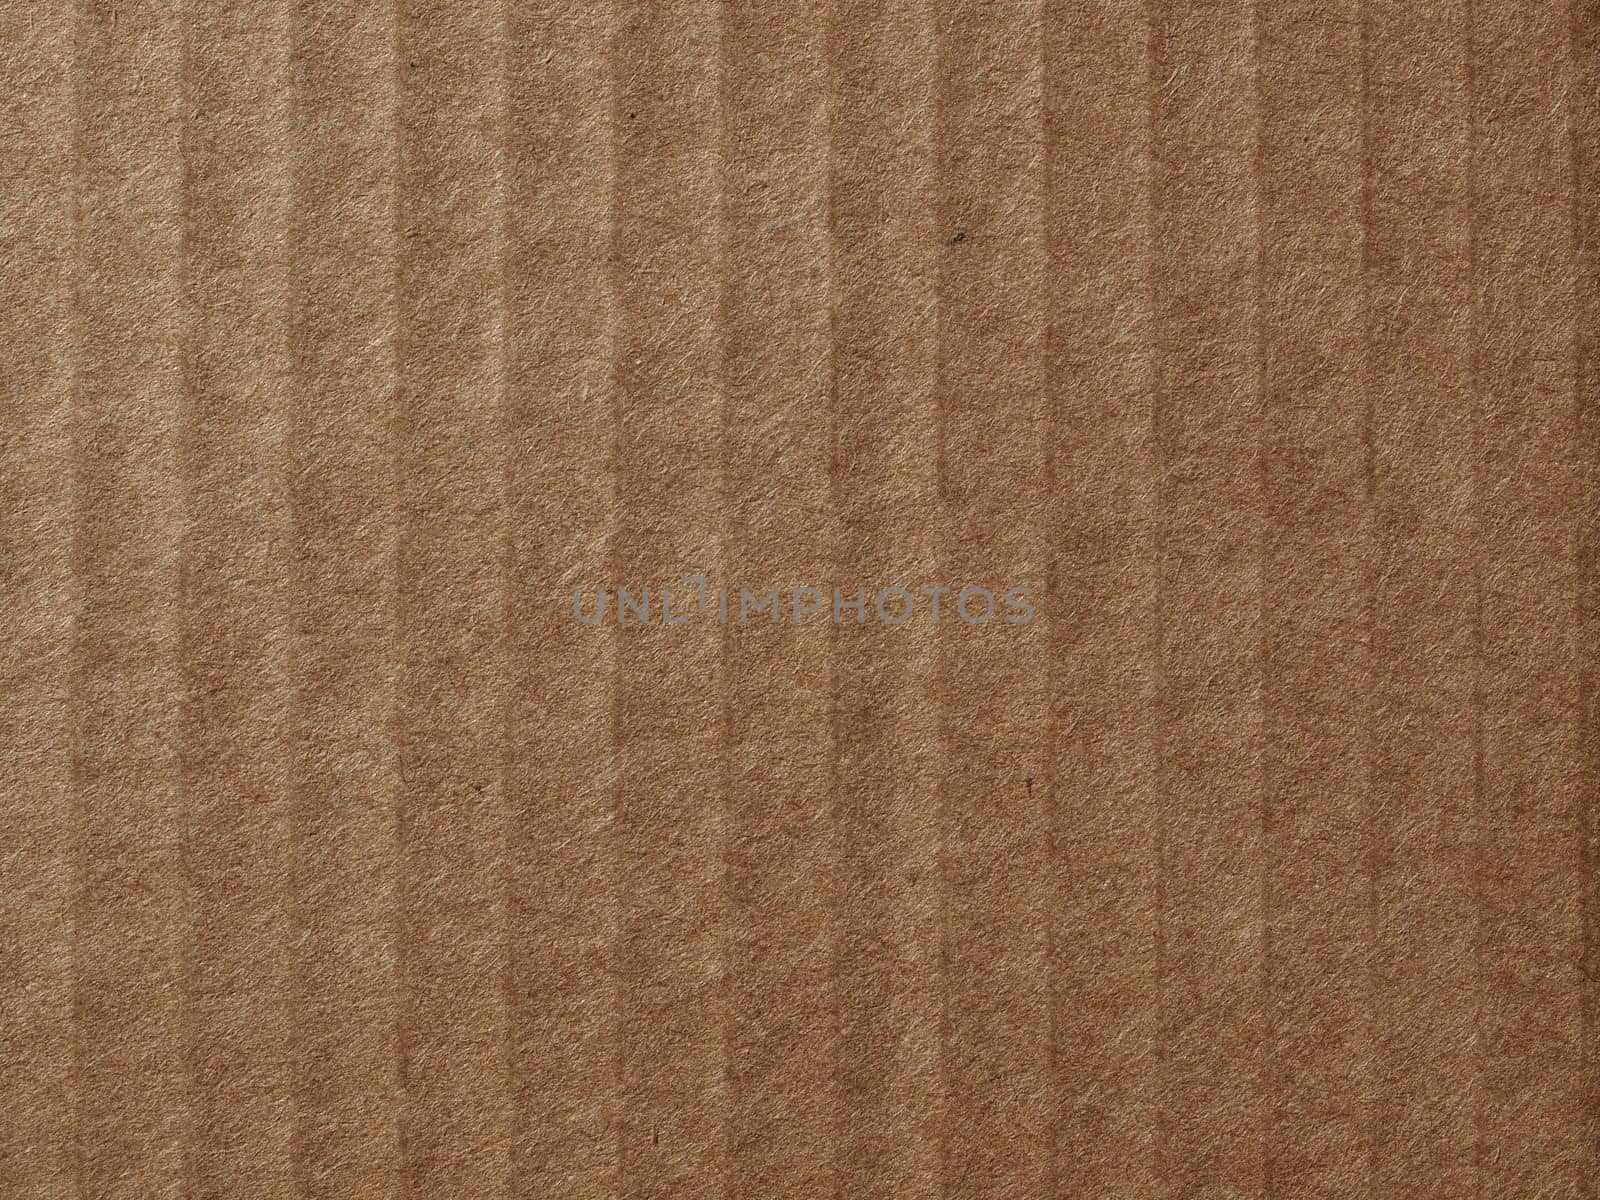 corrugated cardboard blank sheet by paolo77